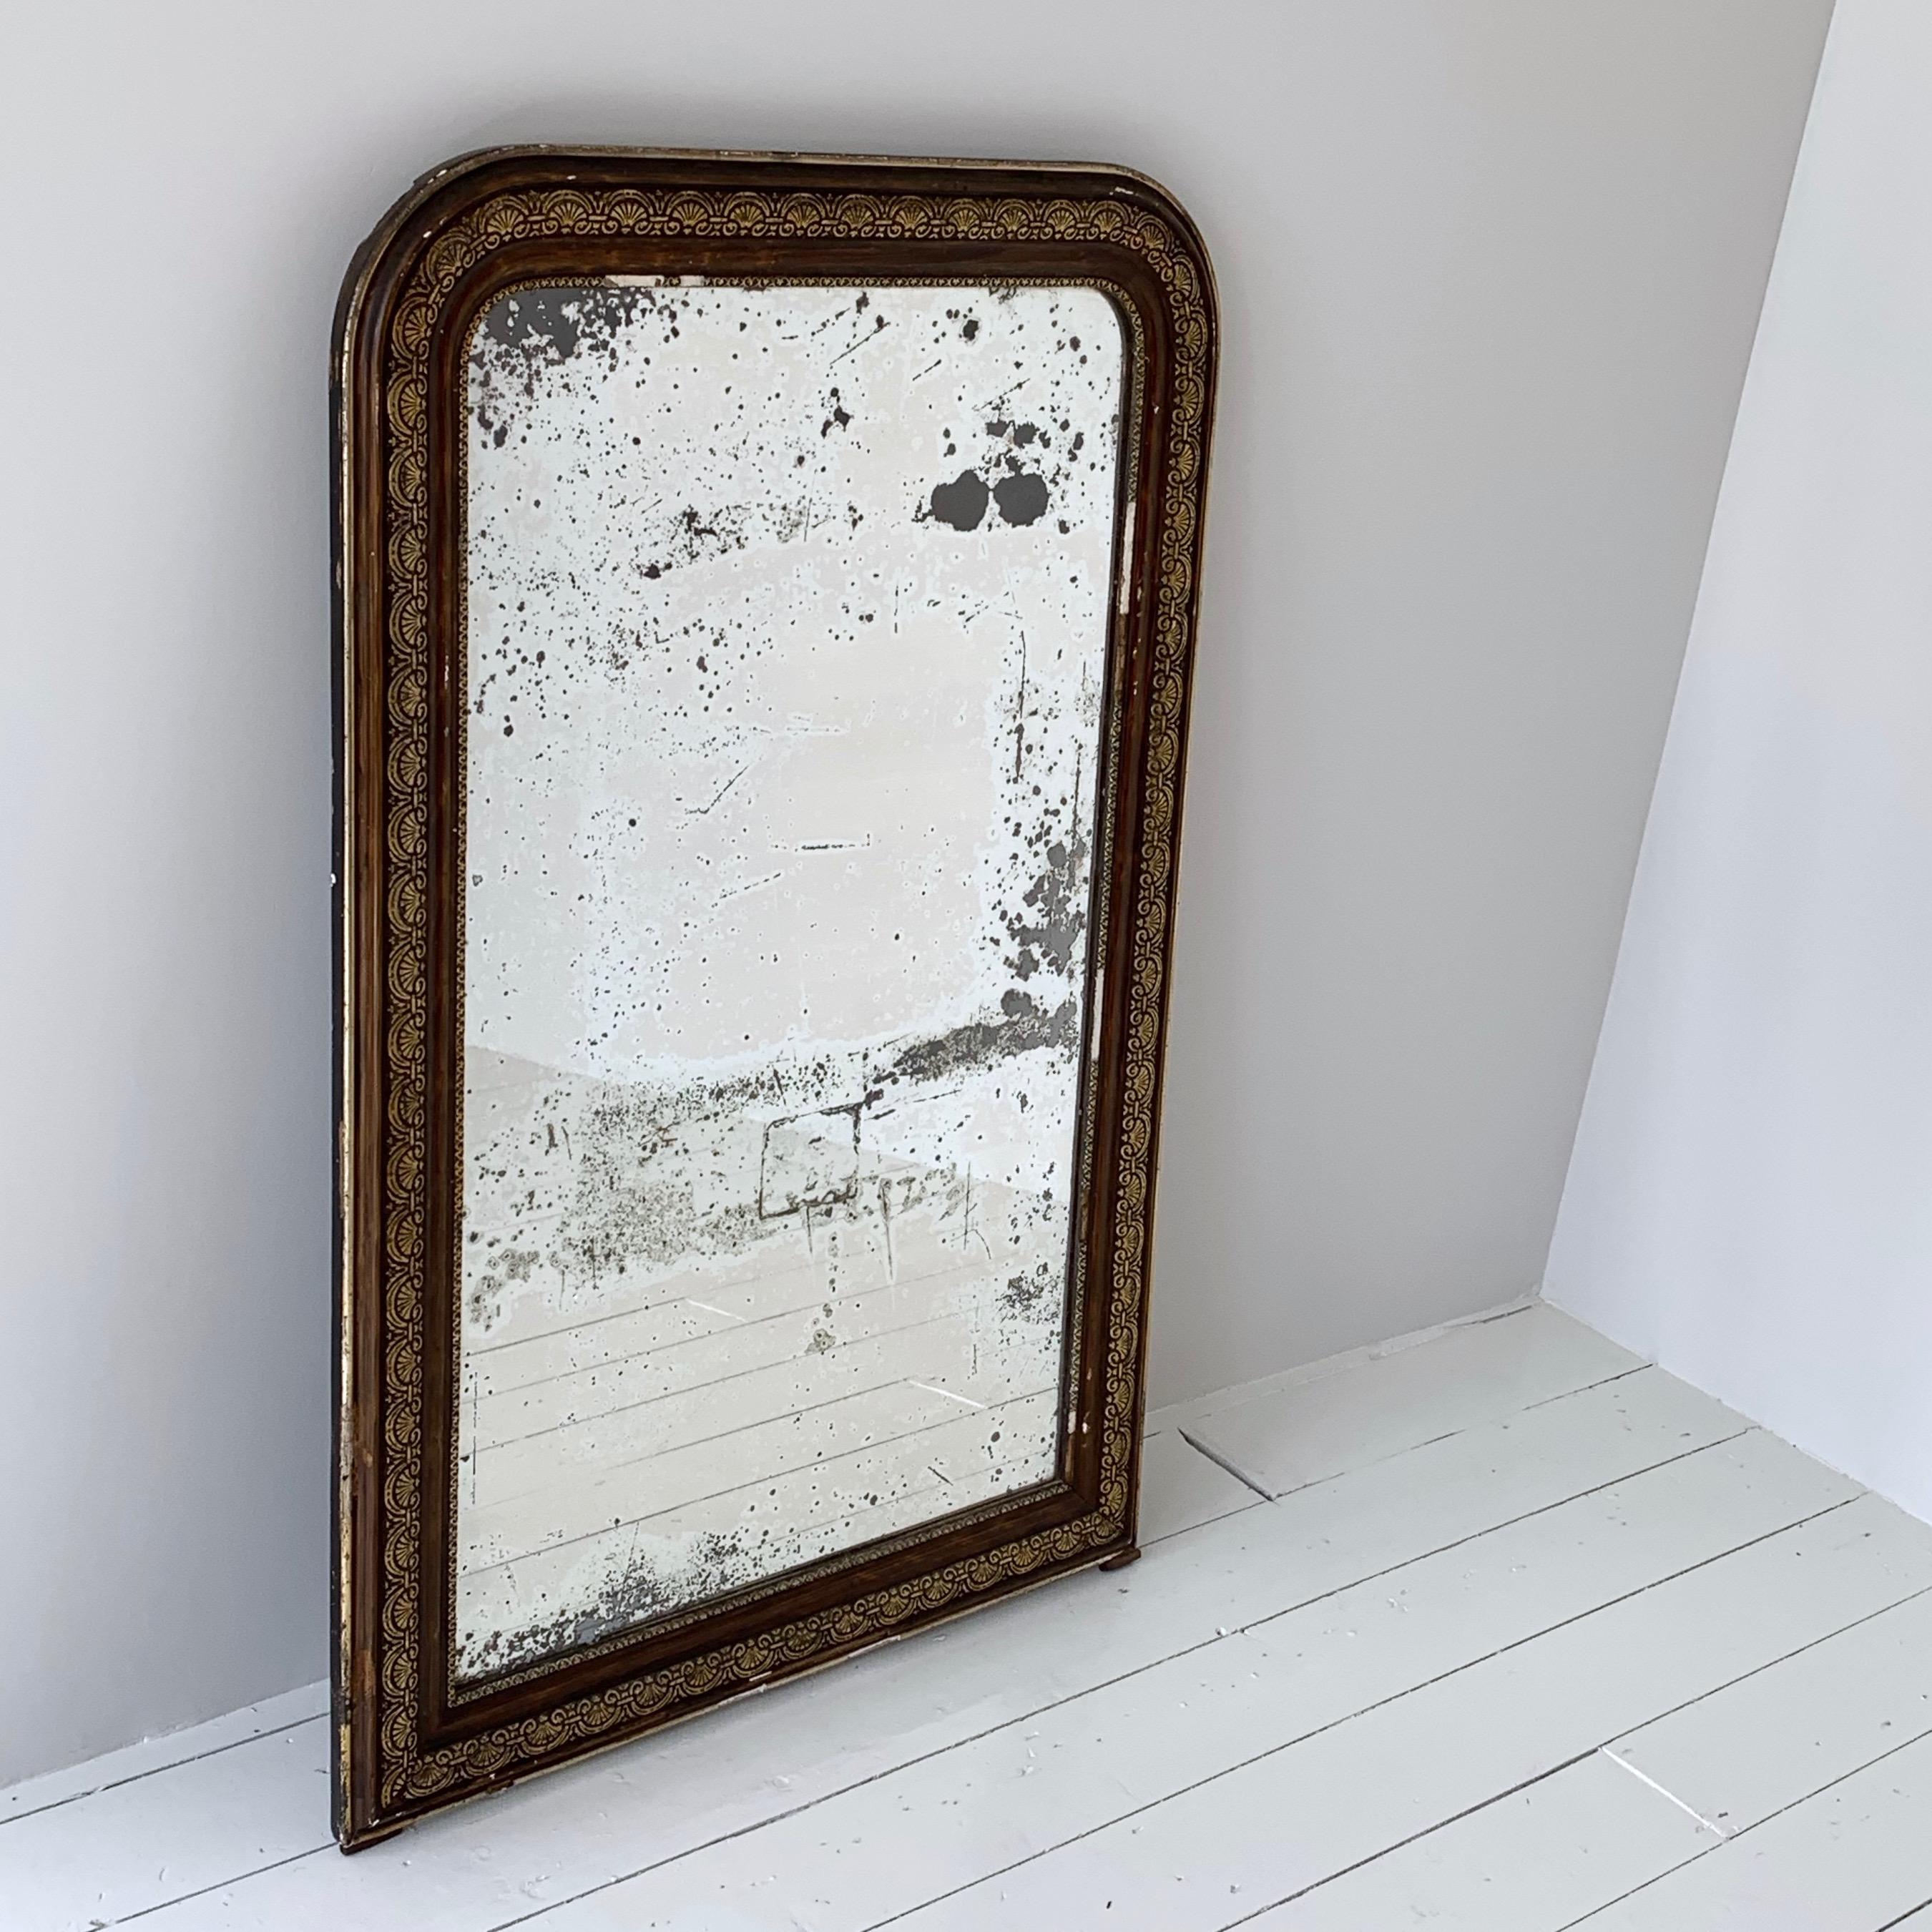 This elegant antique mirror with gold leaf and lacquered finish was crafted in France, circa 1860. The large frame is decorated with hand carved scrolls and foliage and further embellished with decorative edging all around. It is in vintage